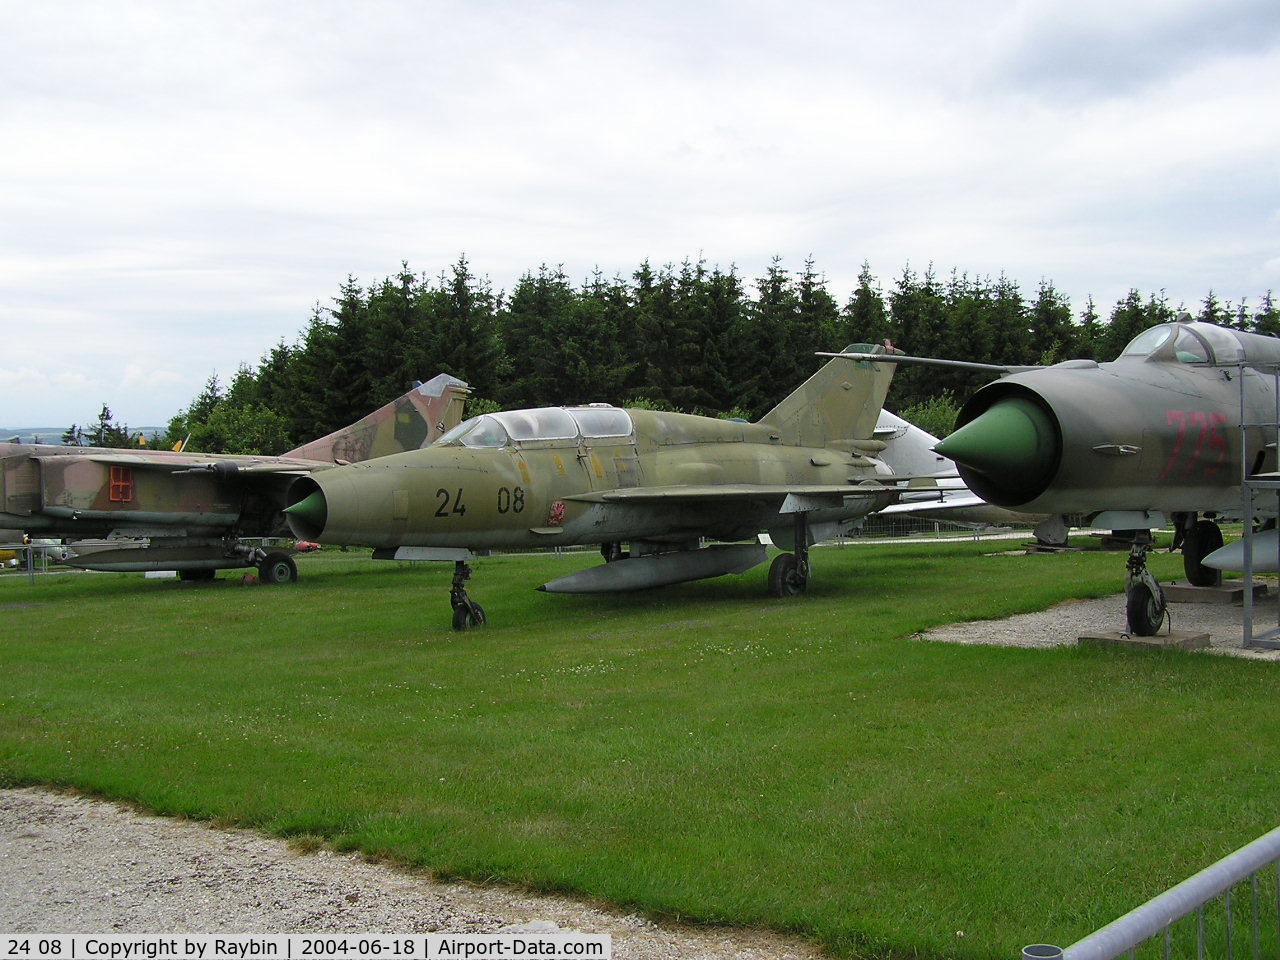 24 08, Mikoyan-Gurevich MiG-21US C/N 02685139, Together with MiG-21 MF 775